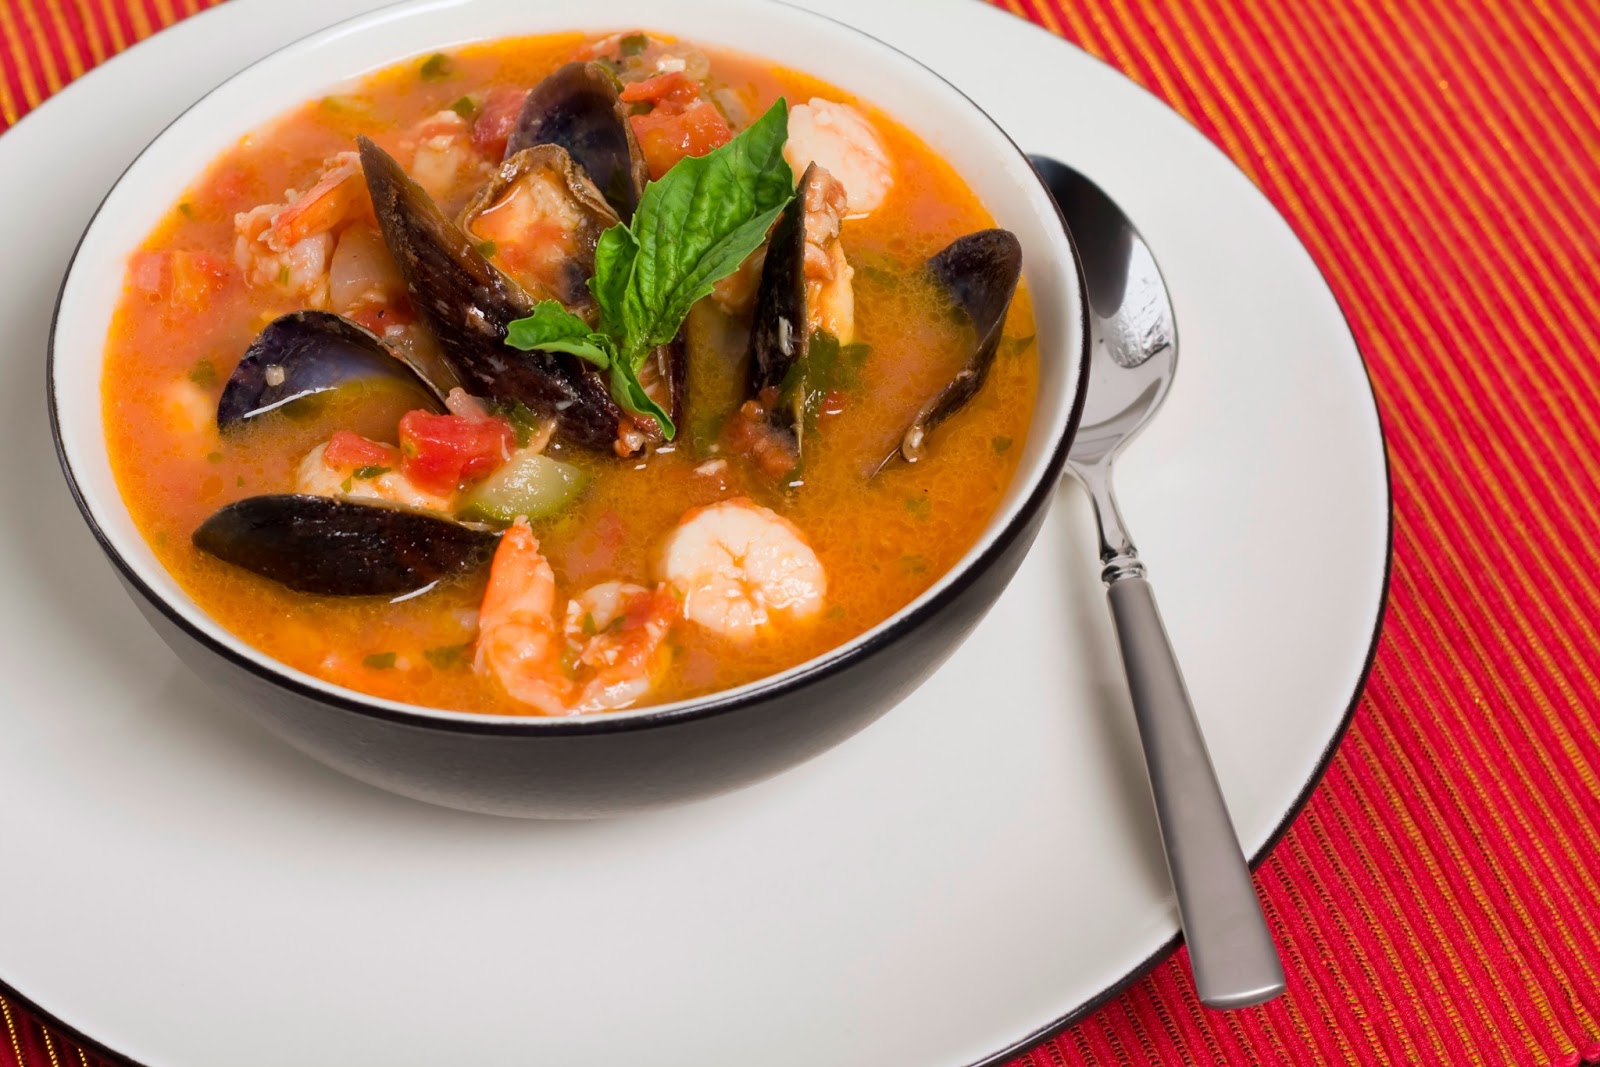 The Supreme Plate Recipe Of The Day Caldos De Siete Mares (Seafood Soup)